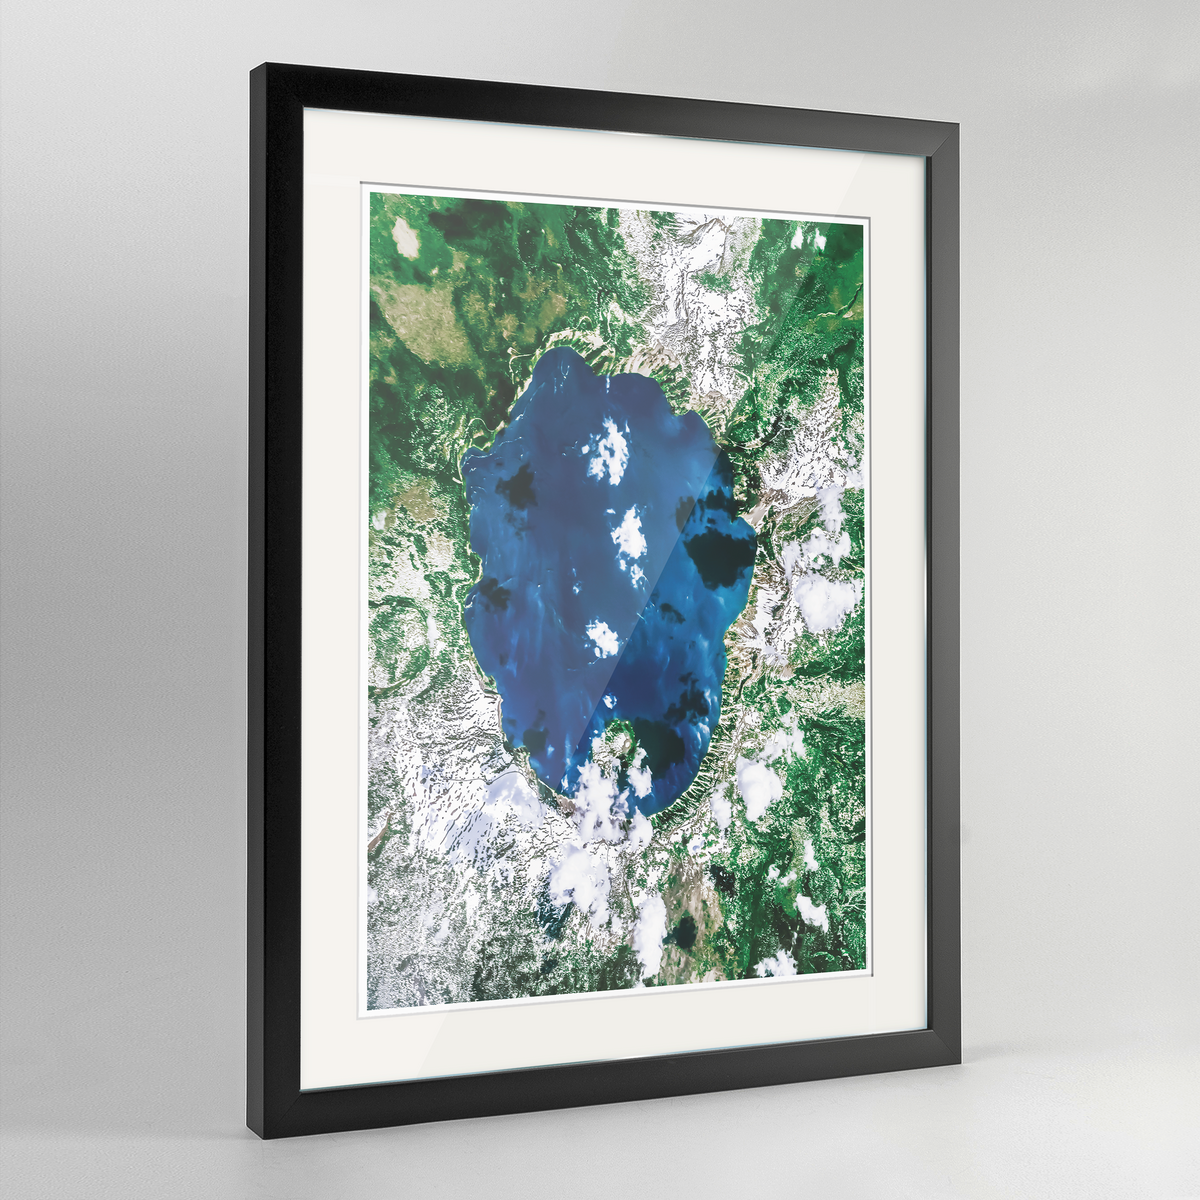 Crater Lake Earth Photography Art Print - Framed